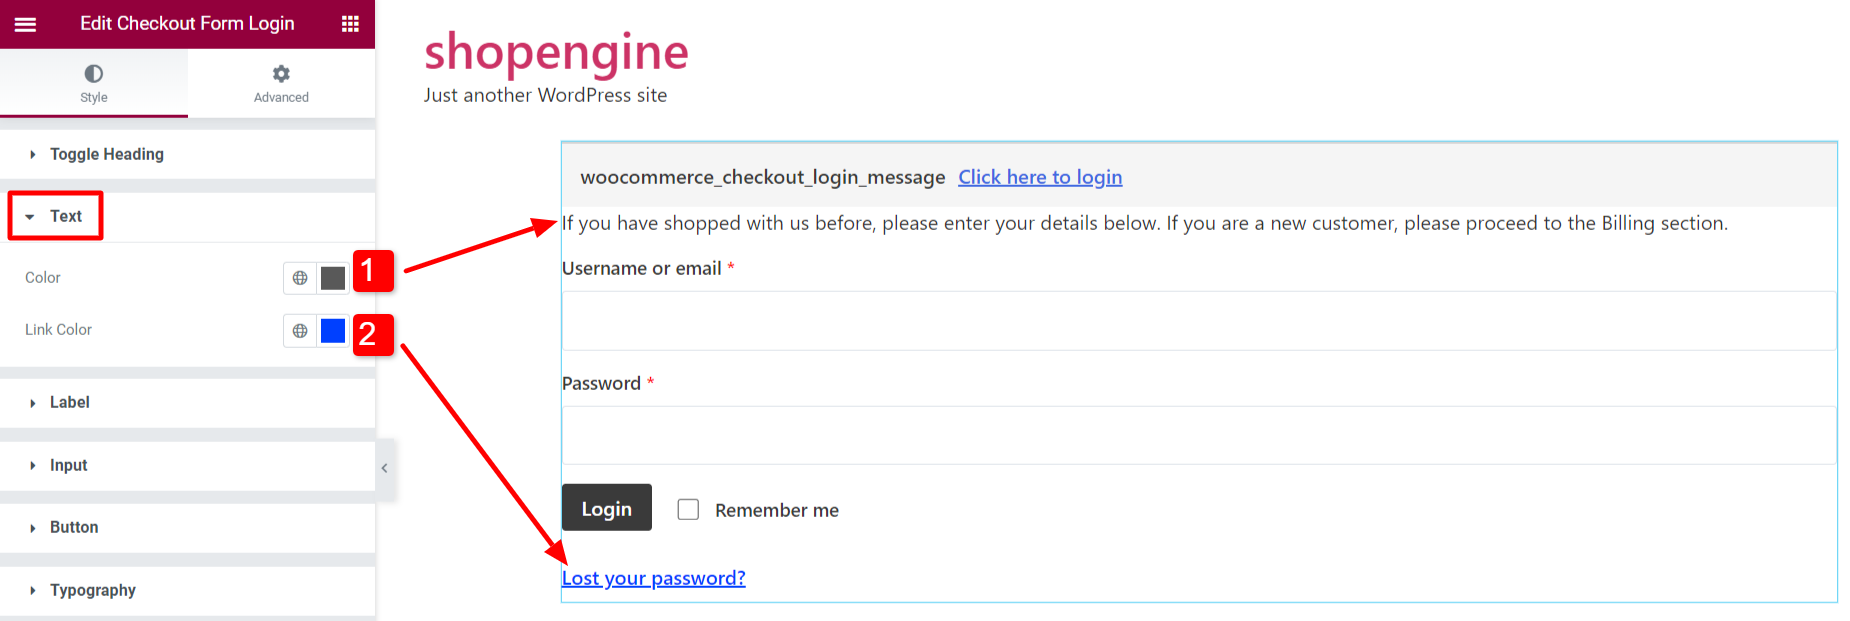 customize text backgound of checkout login form